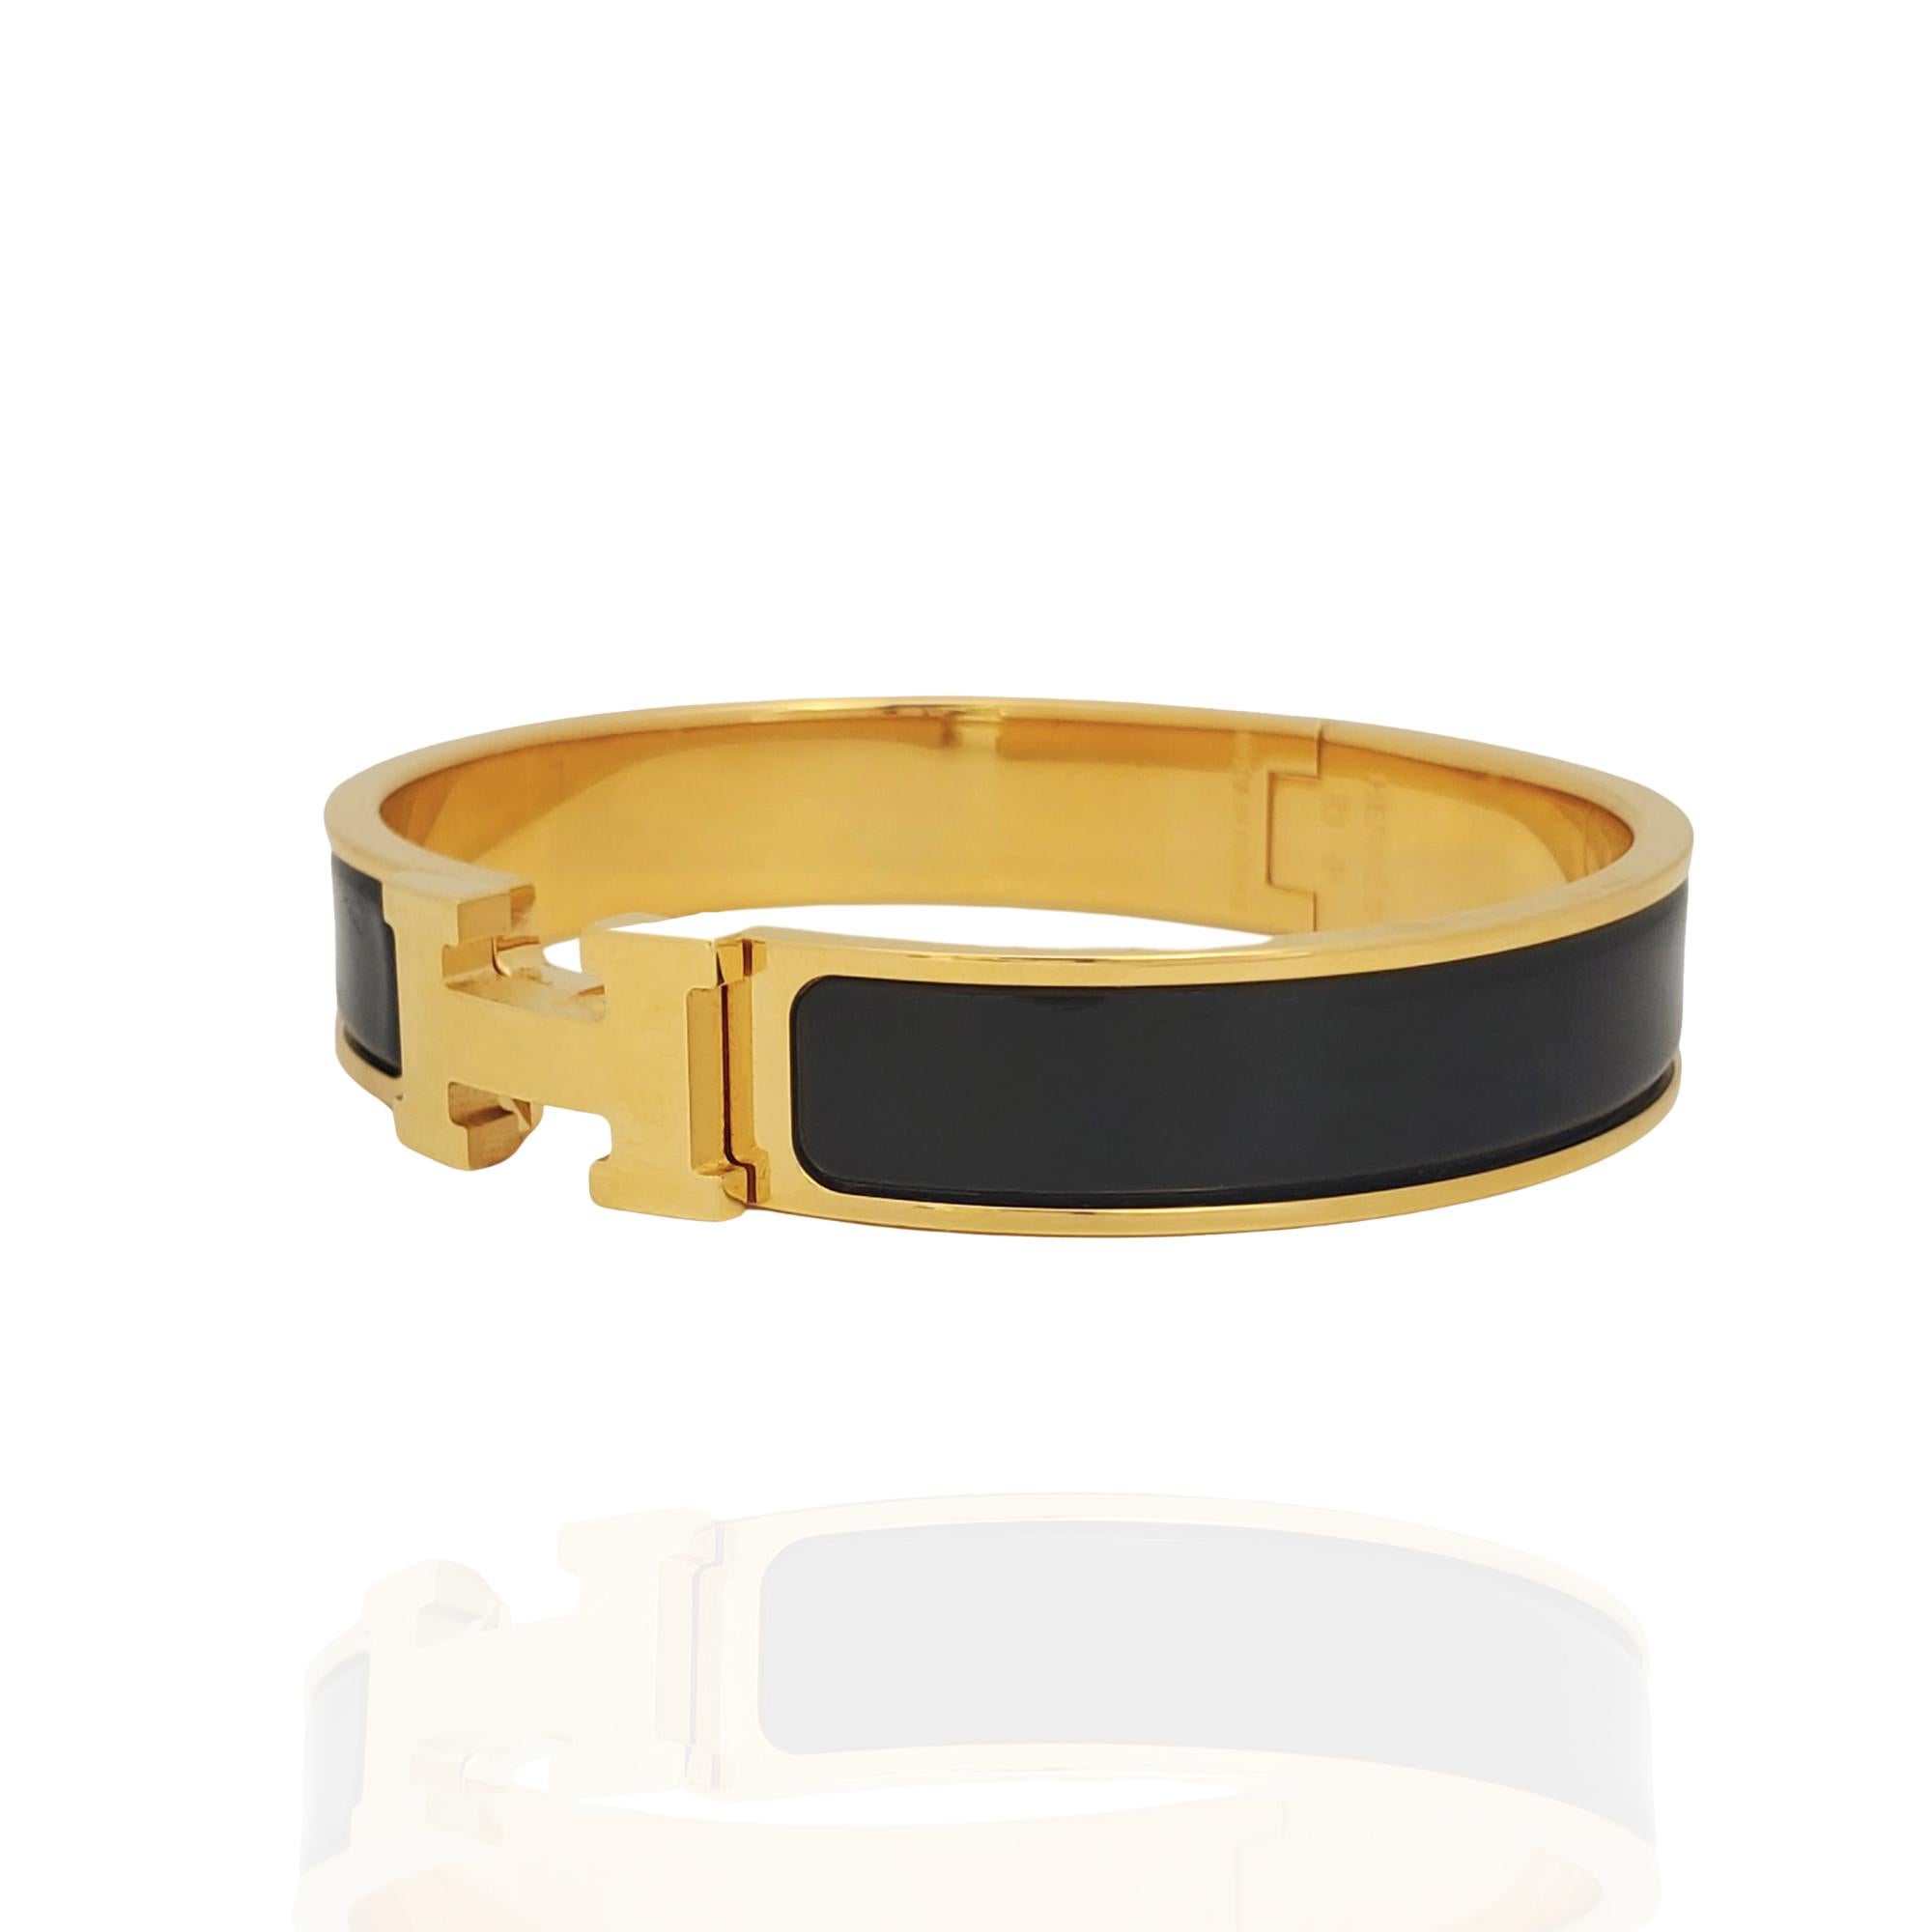 Authentic Hermès Clic H narrow bracelet crafted in black enamel with gold-plated hardware. The bracelet measures .47 inches in width with an internal circumference of 7 inches.  Signed Hermès, Made in France, with Q stamp and hallmark.  Bracelet is